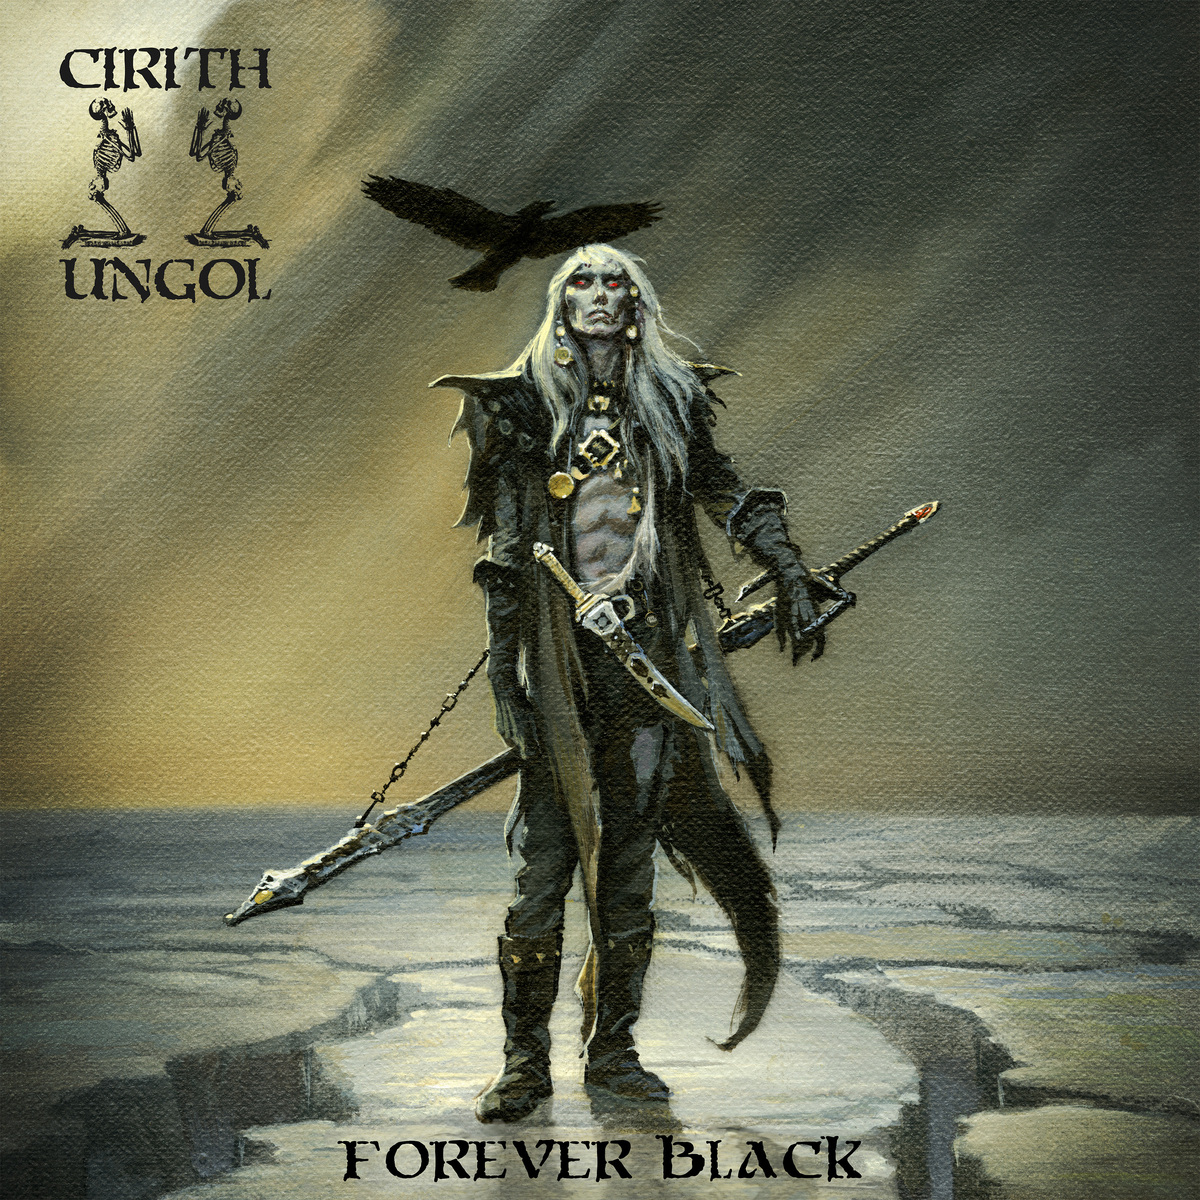 rt metalblade lance hall chats with cirithu ungol bassist jarvis leatherby discussing the upcoming record foreverblack and more e29ea1efb88f youtube com twitter com pbs twimg com RT MetalBlade: Lance Hall chats with @CirithU Ungol bassist, Jarvis Leatherby; discussing the upcoming record, #ForeverBlack and more! ➡️ [youtube.com] [twitter.com] [pbs.twimg.com] | Cirith Ungol Online